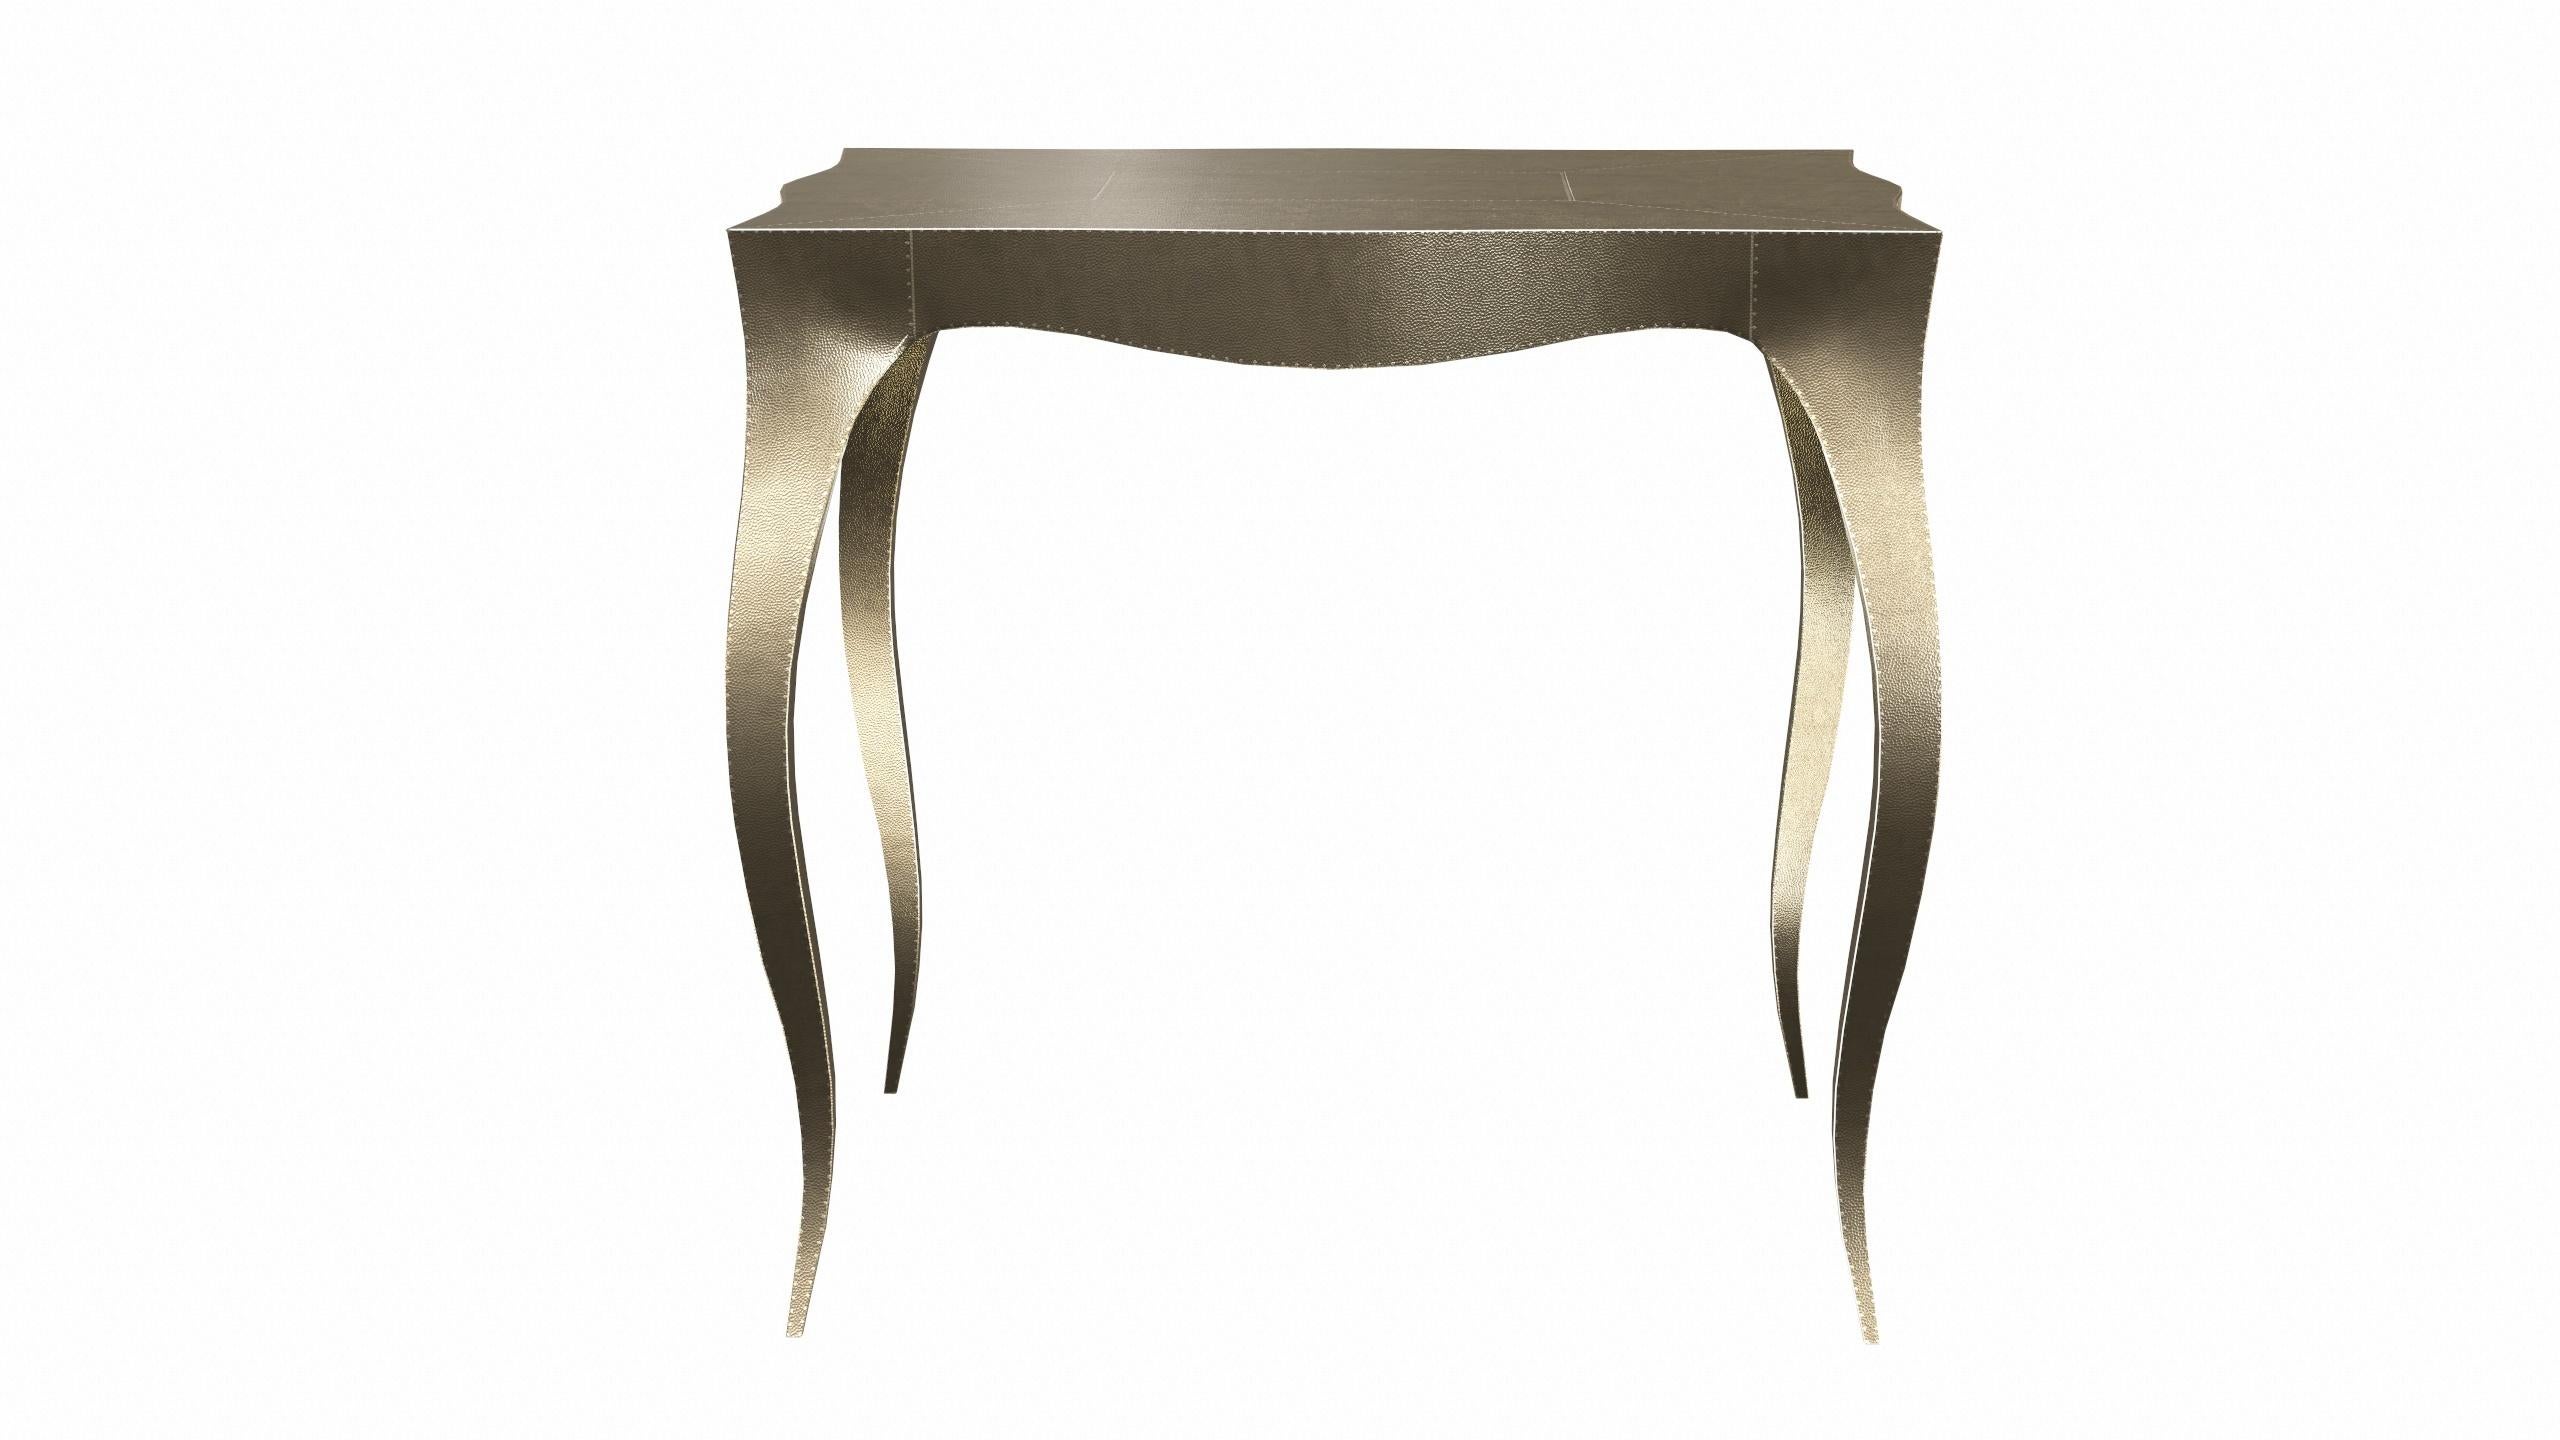 American Louise Art Deco Center Tables Mid. Hammered Brass by Paul Mathieu for S.Odegard For Sale